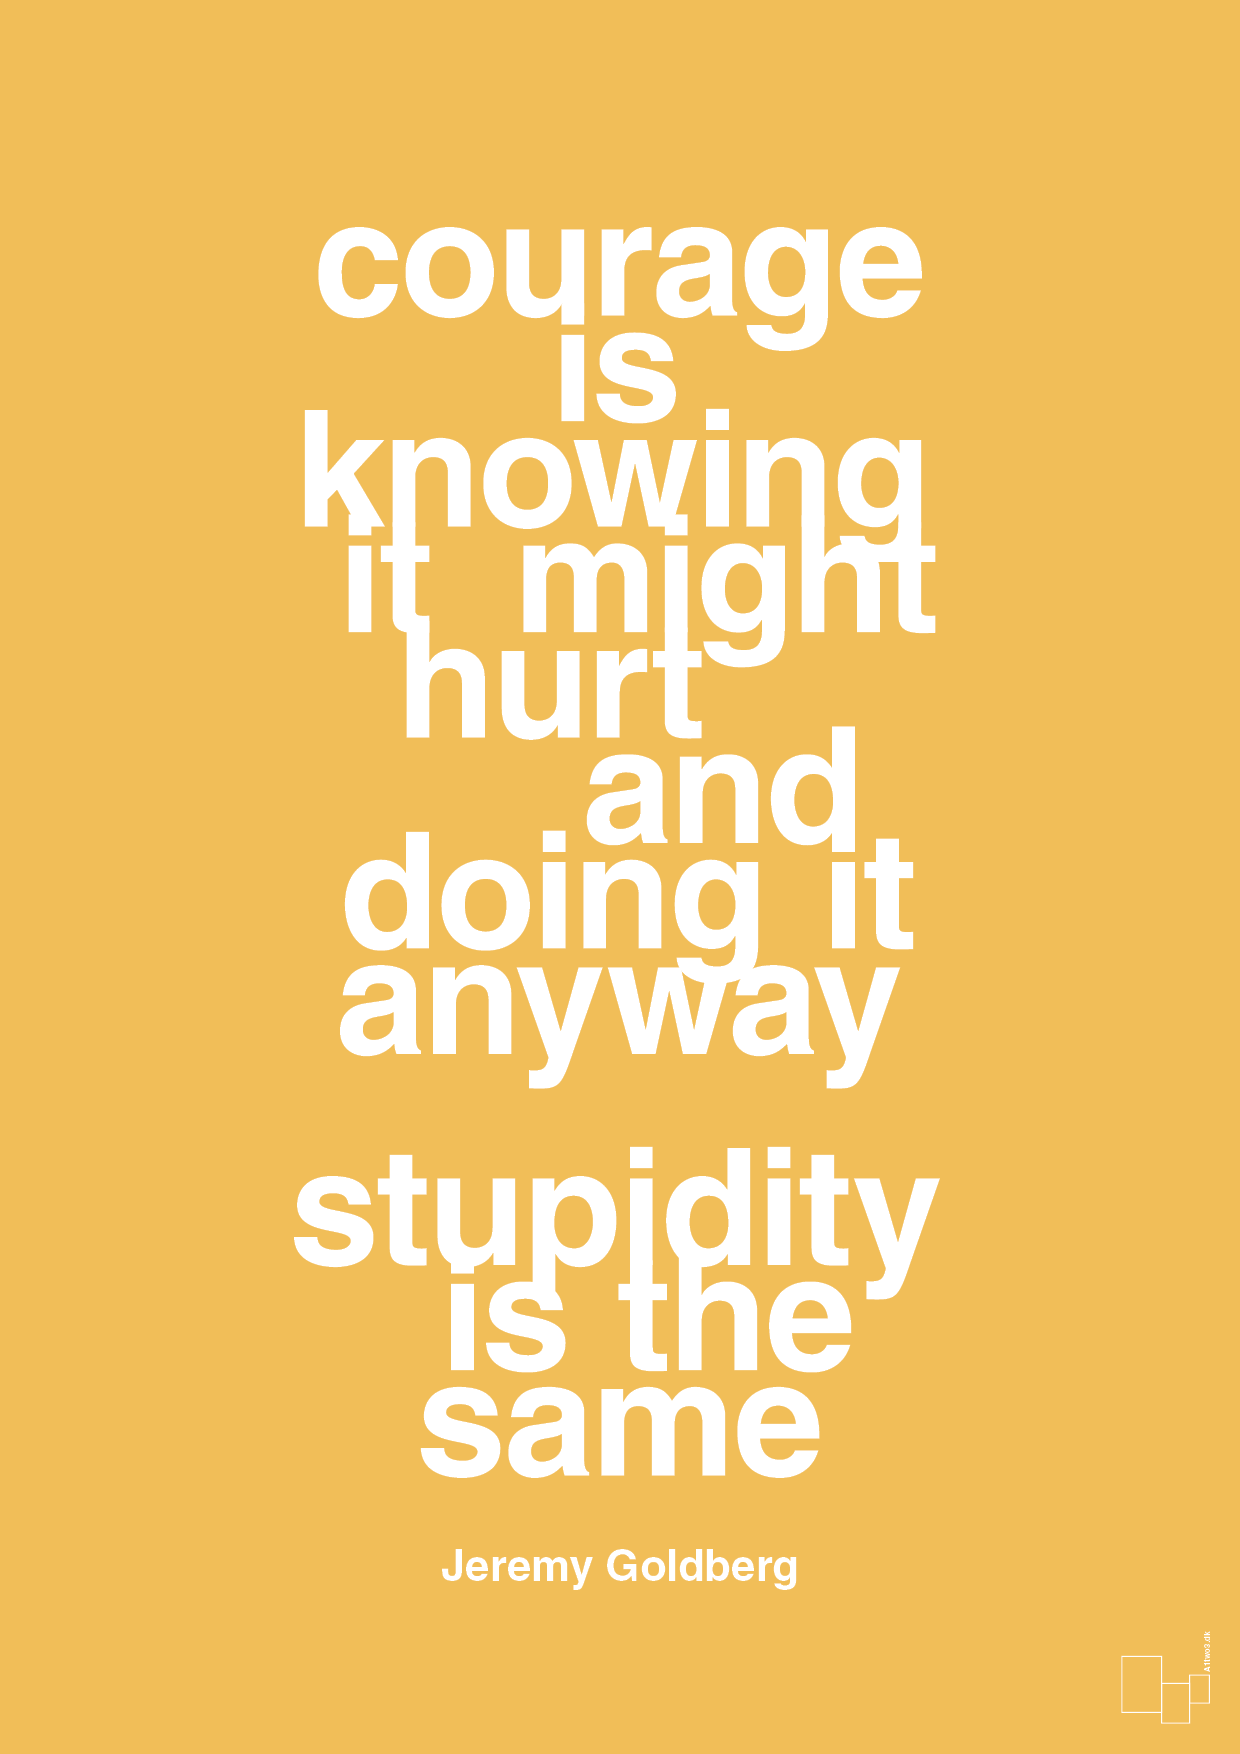 courage is knowing it might hurt and doing it anyway stupidity is the same - Plakat med Citater i Honeycomb